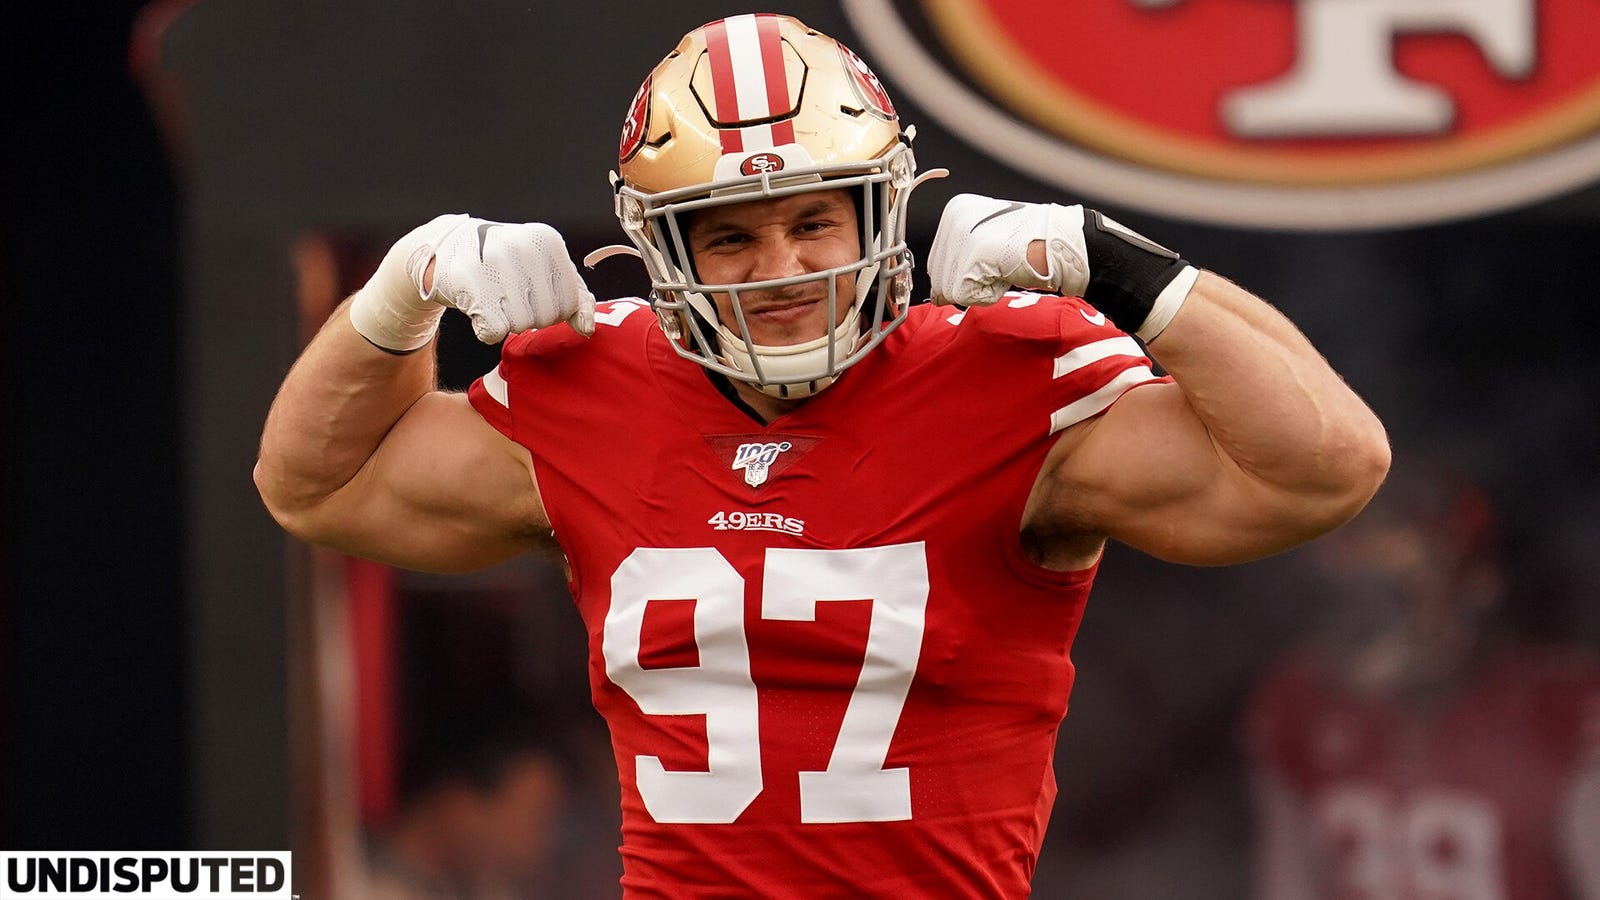 49ers vs. Packers: Bosa doesn't think teams made Love ‘uncomfortable'